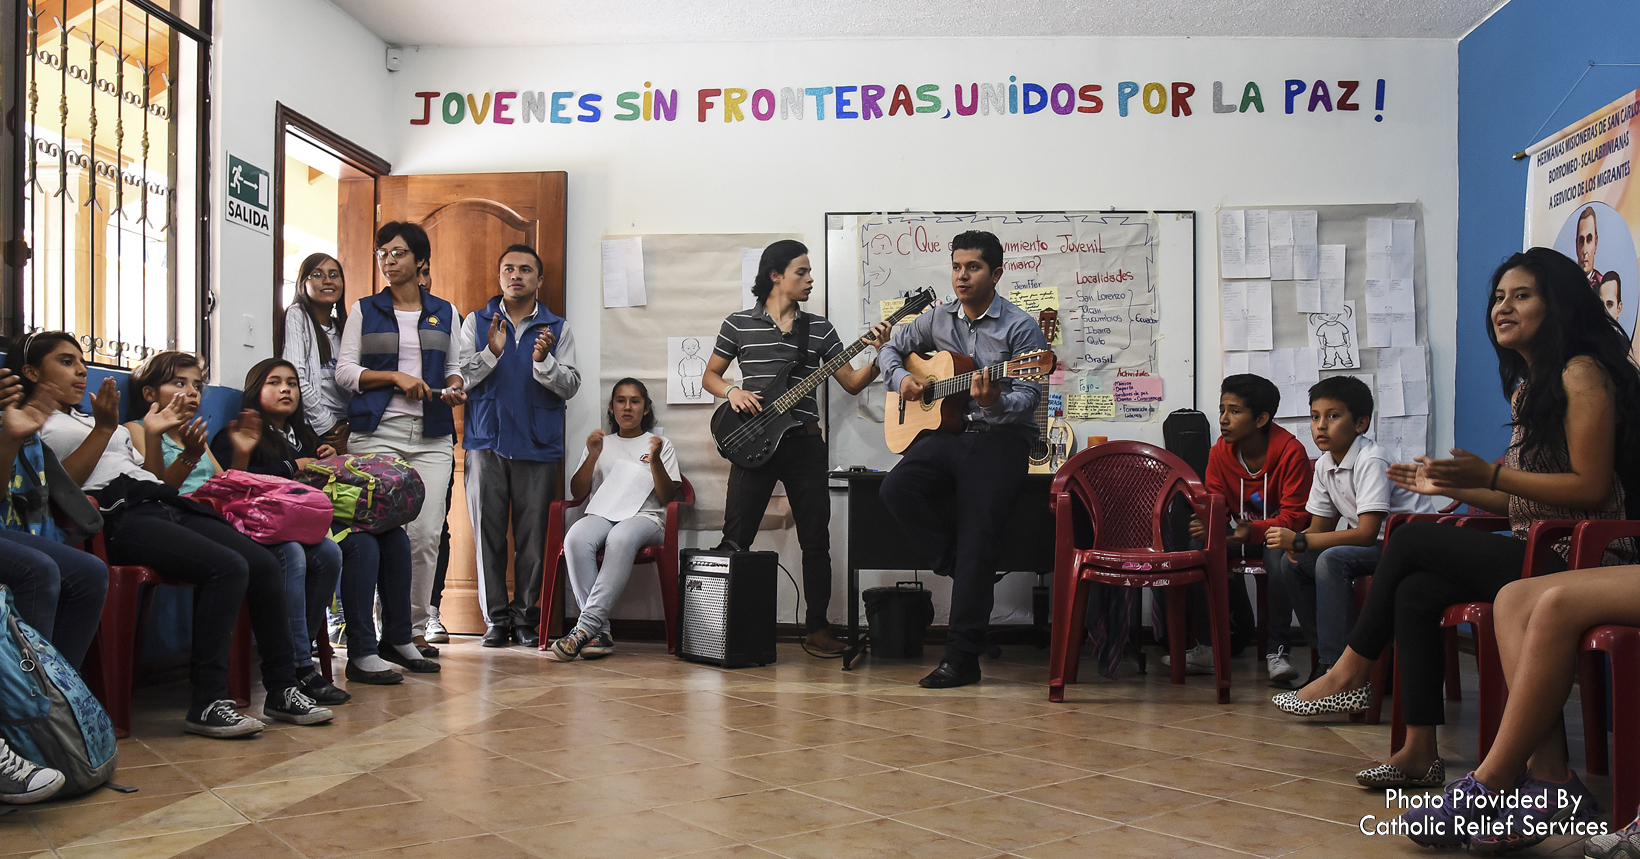 A group of migrants and refugees share life experiences and music.